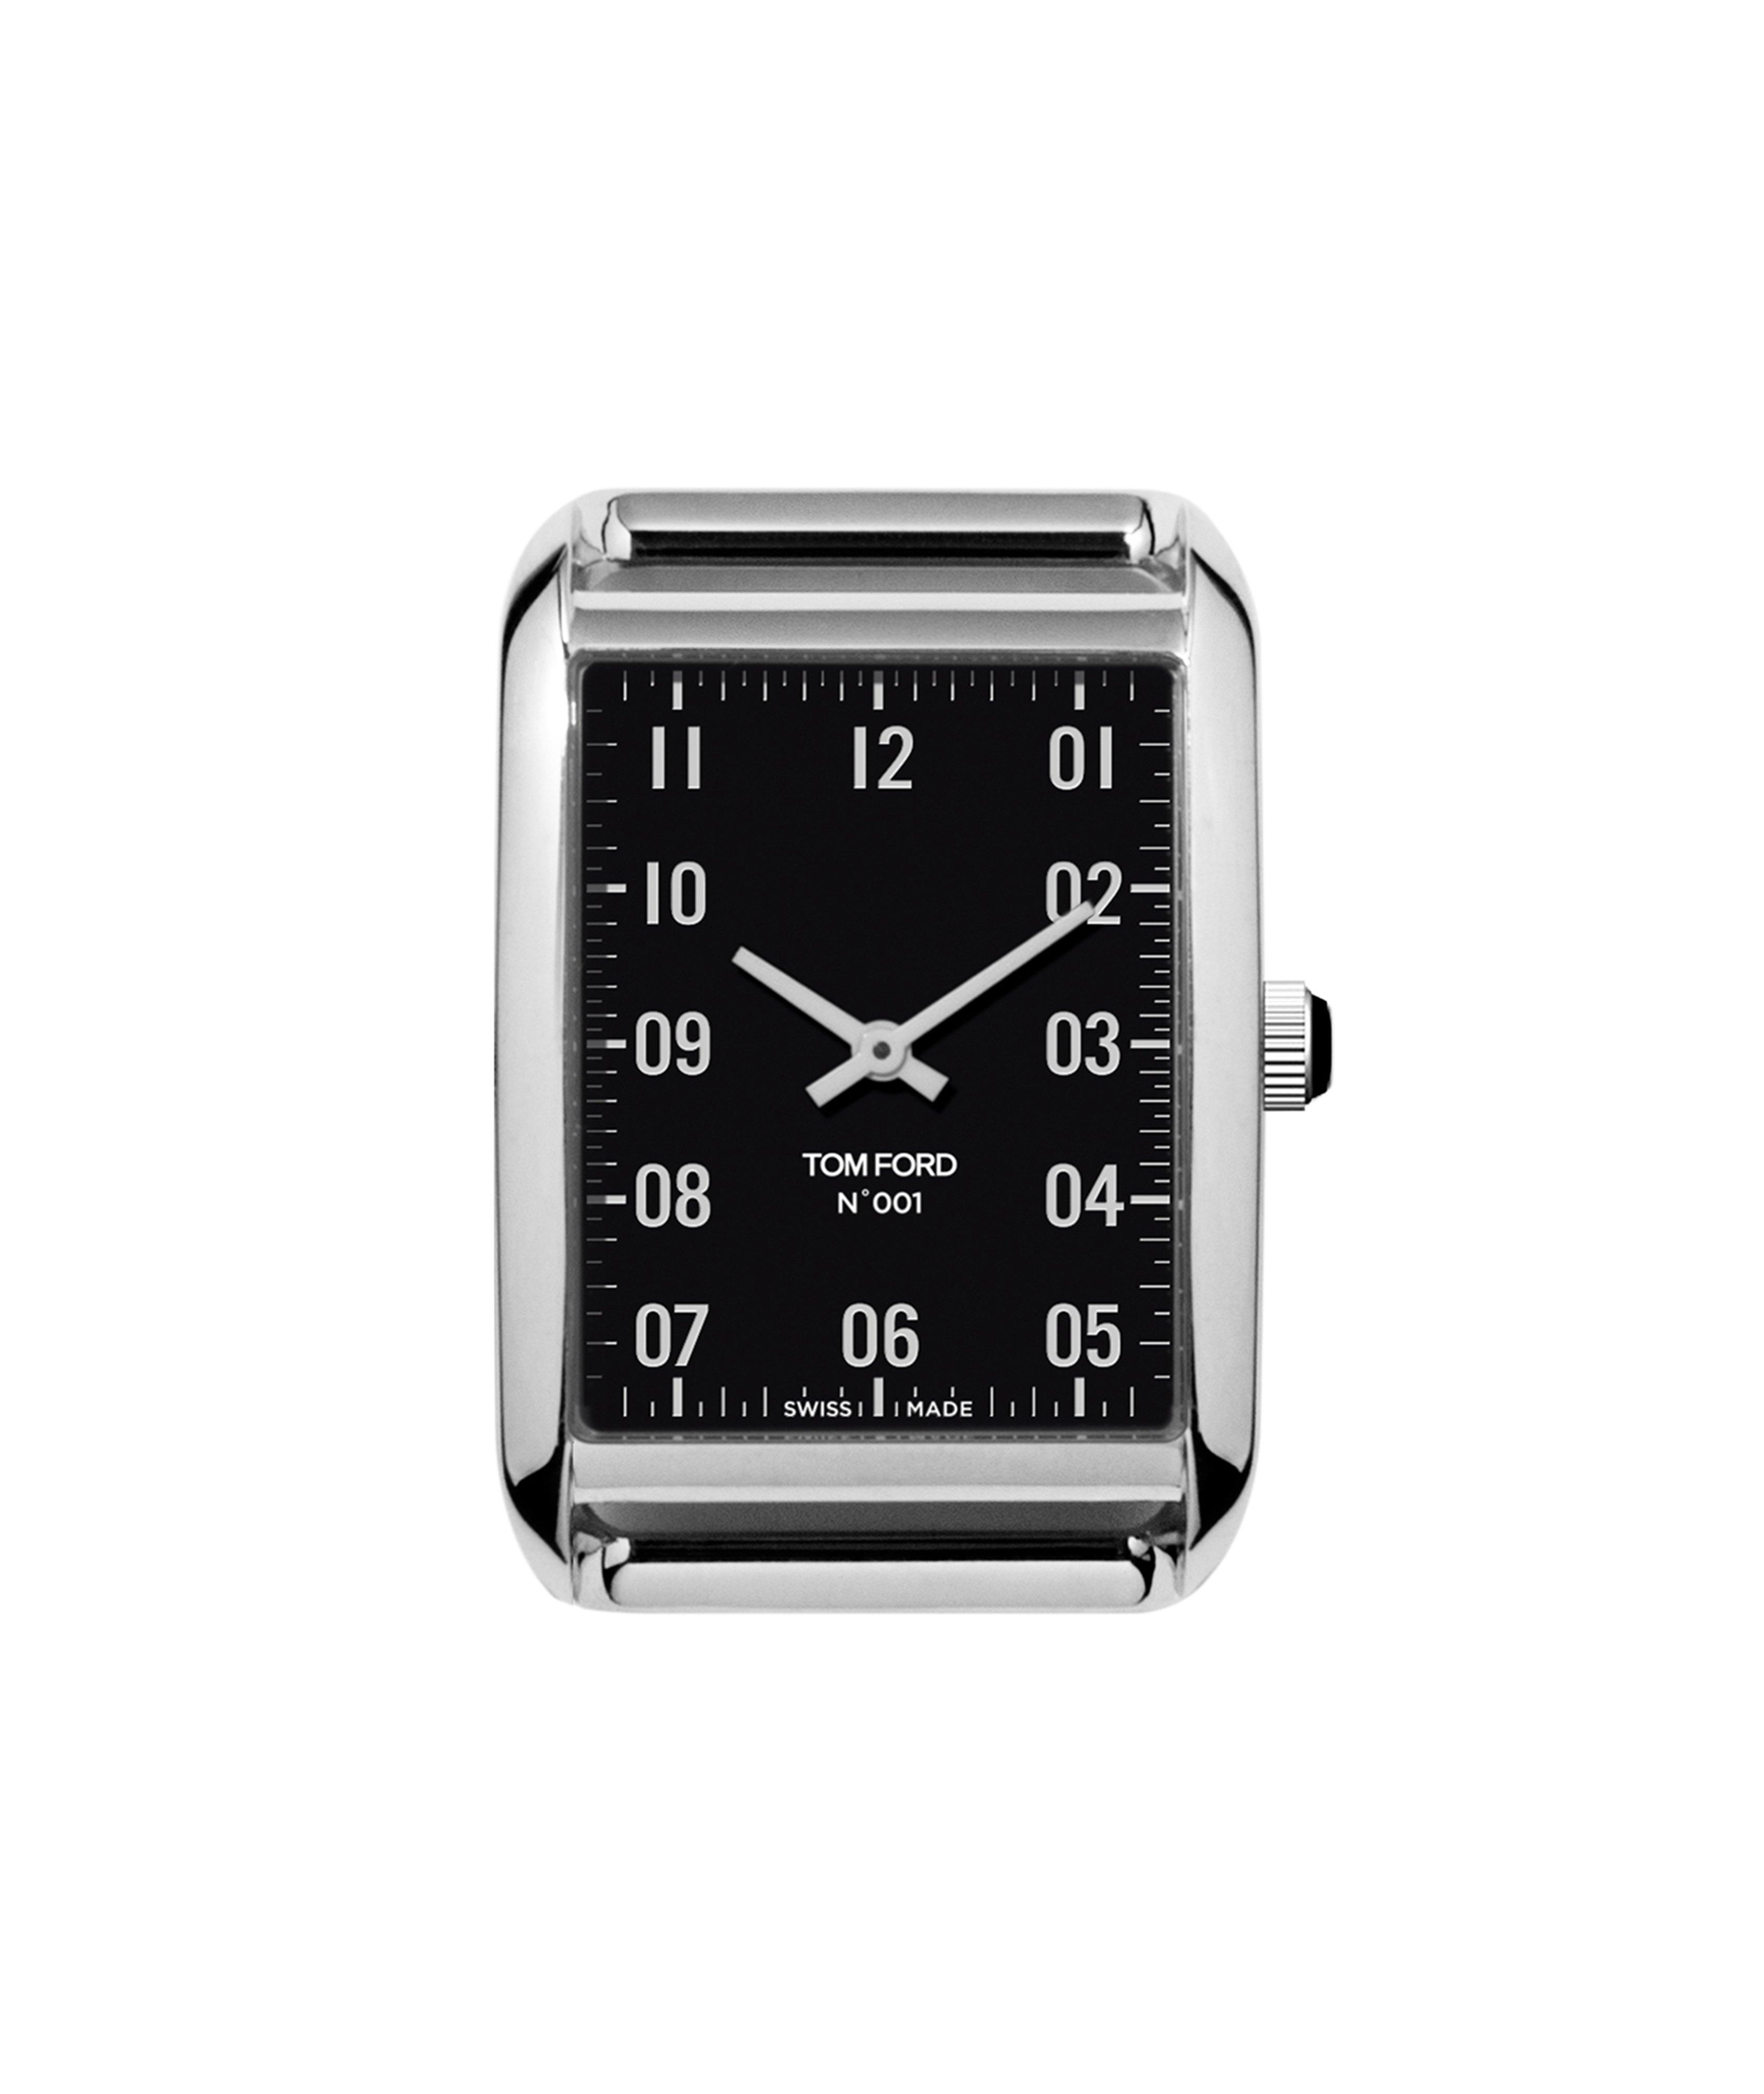 No. 001 Polished Stainless Steel Interchangeable Watch Face image 0